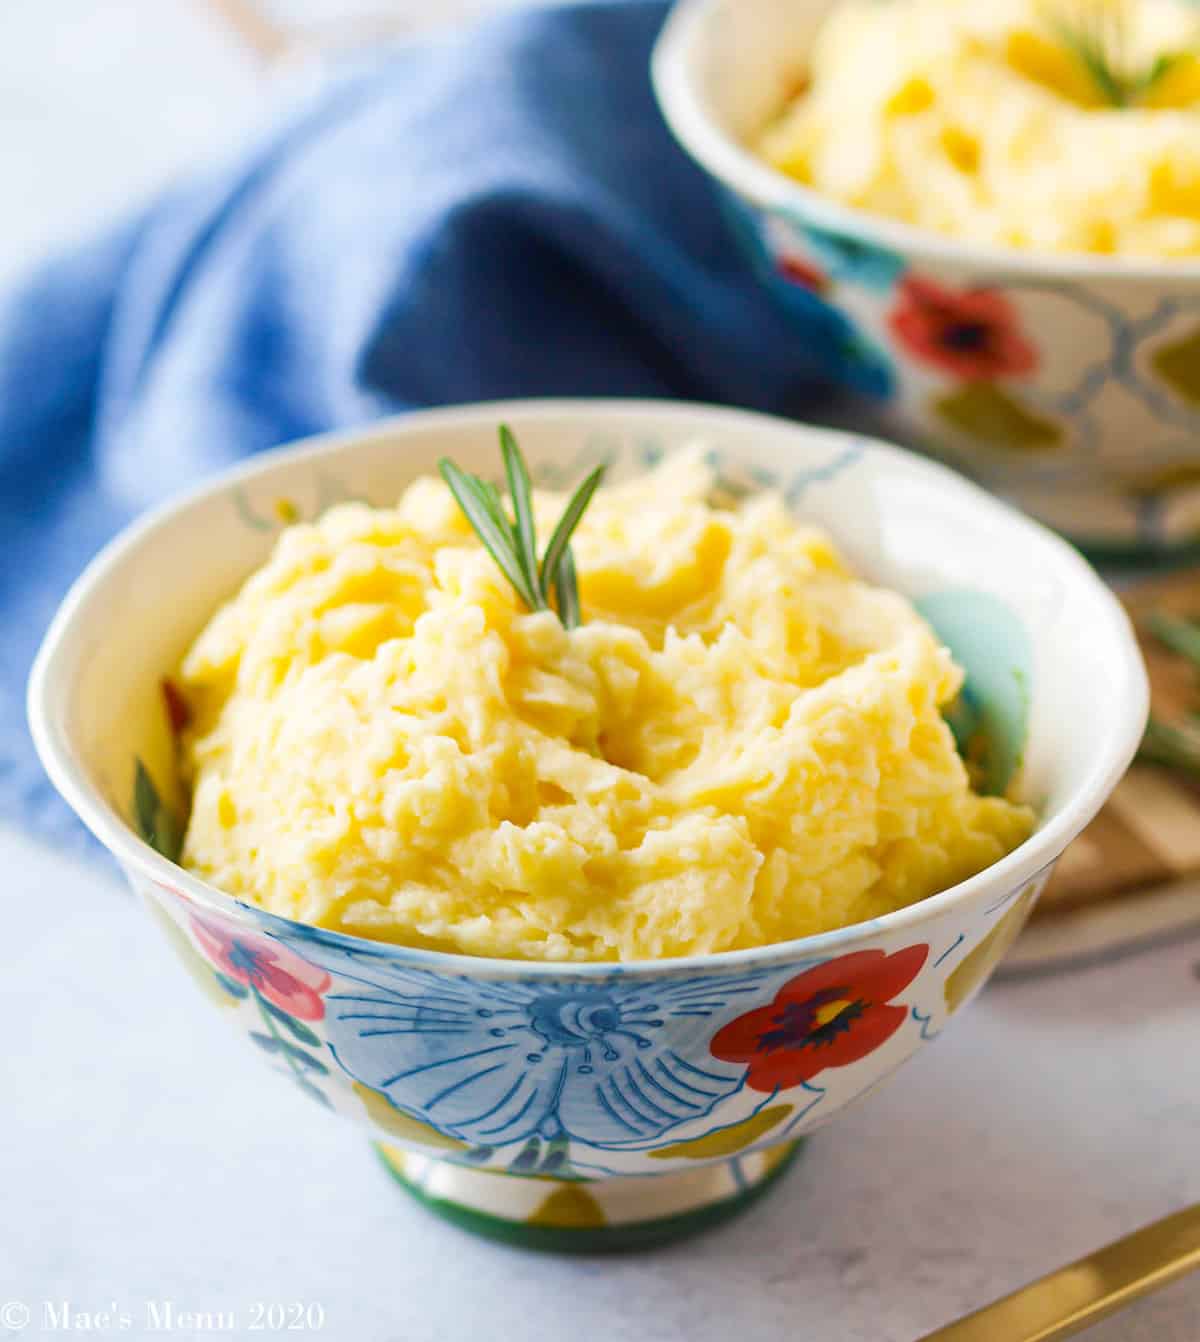 A side angle shot of two bowls of healthy mashed potatoes with sprigs of rosemary on top. In the backround is a blue tea towel